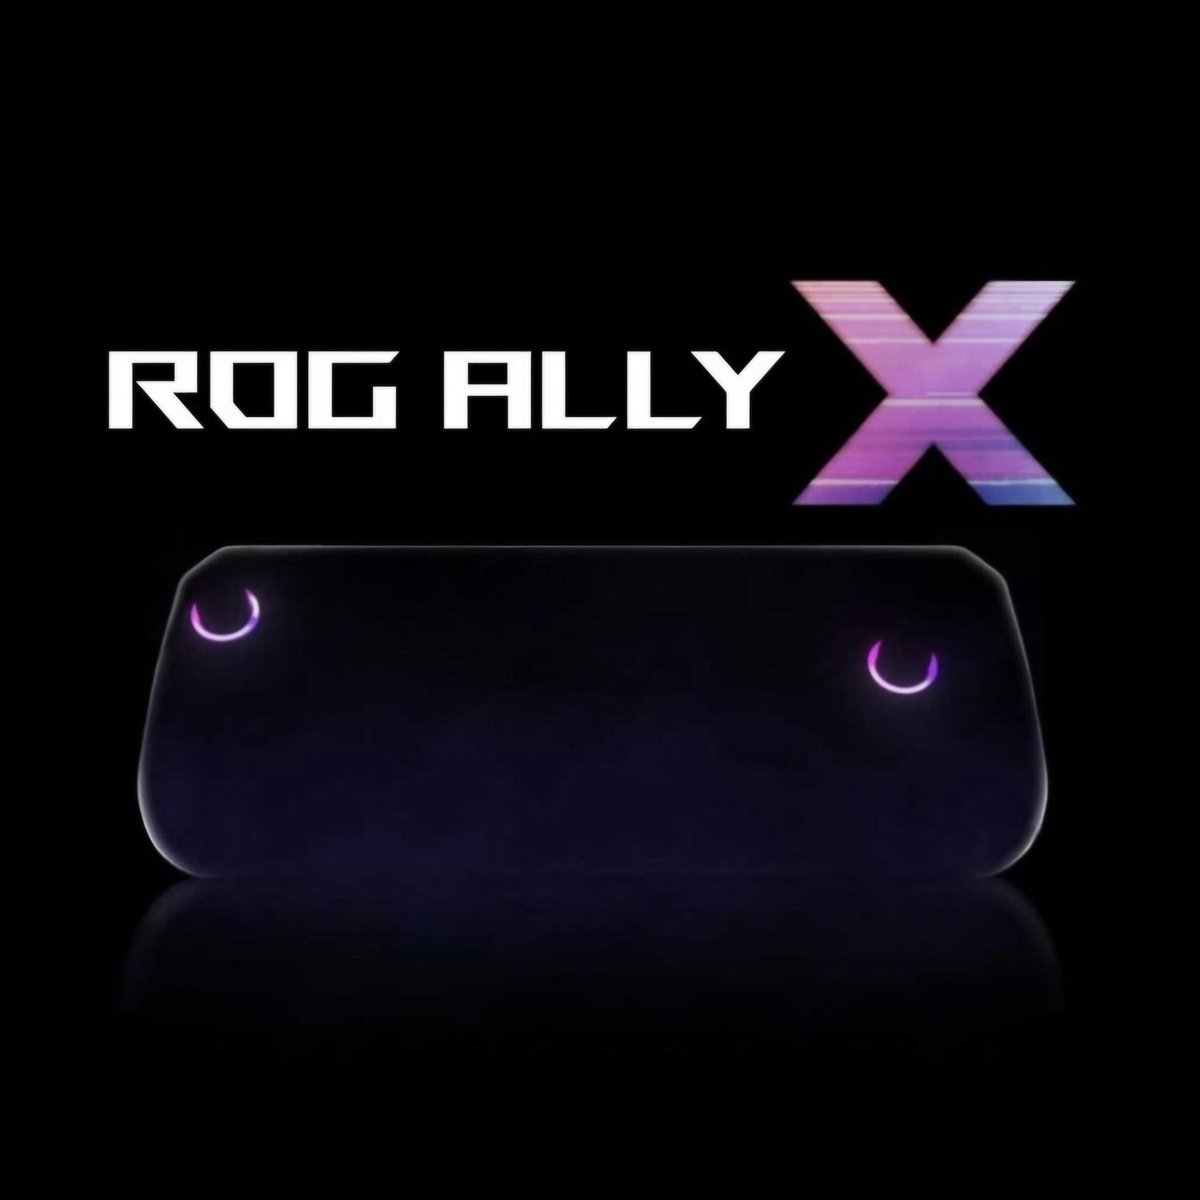 ASUS ROG Ally X announced! 🦇🎮 Here's what to expect:

30-40% increase in battery life
-Black color variant
-Expanded M.2 2280 SSD slot (easier to find third party increased SSD storage)
-Easier hardware swaps 

#ASUS #ROGAlly #PCGaming #PCHandheld